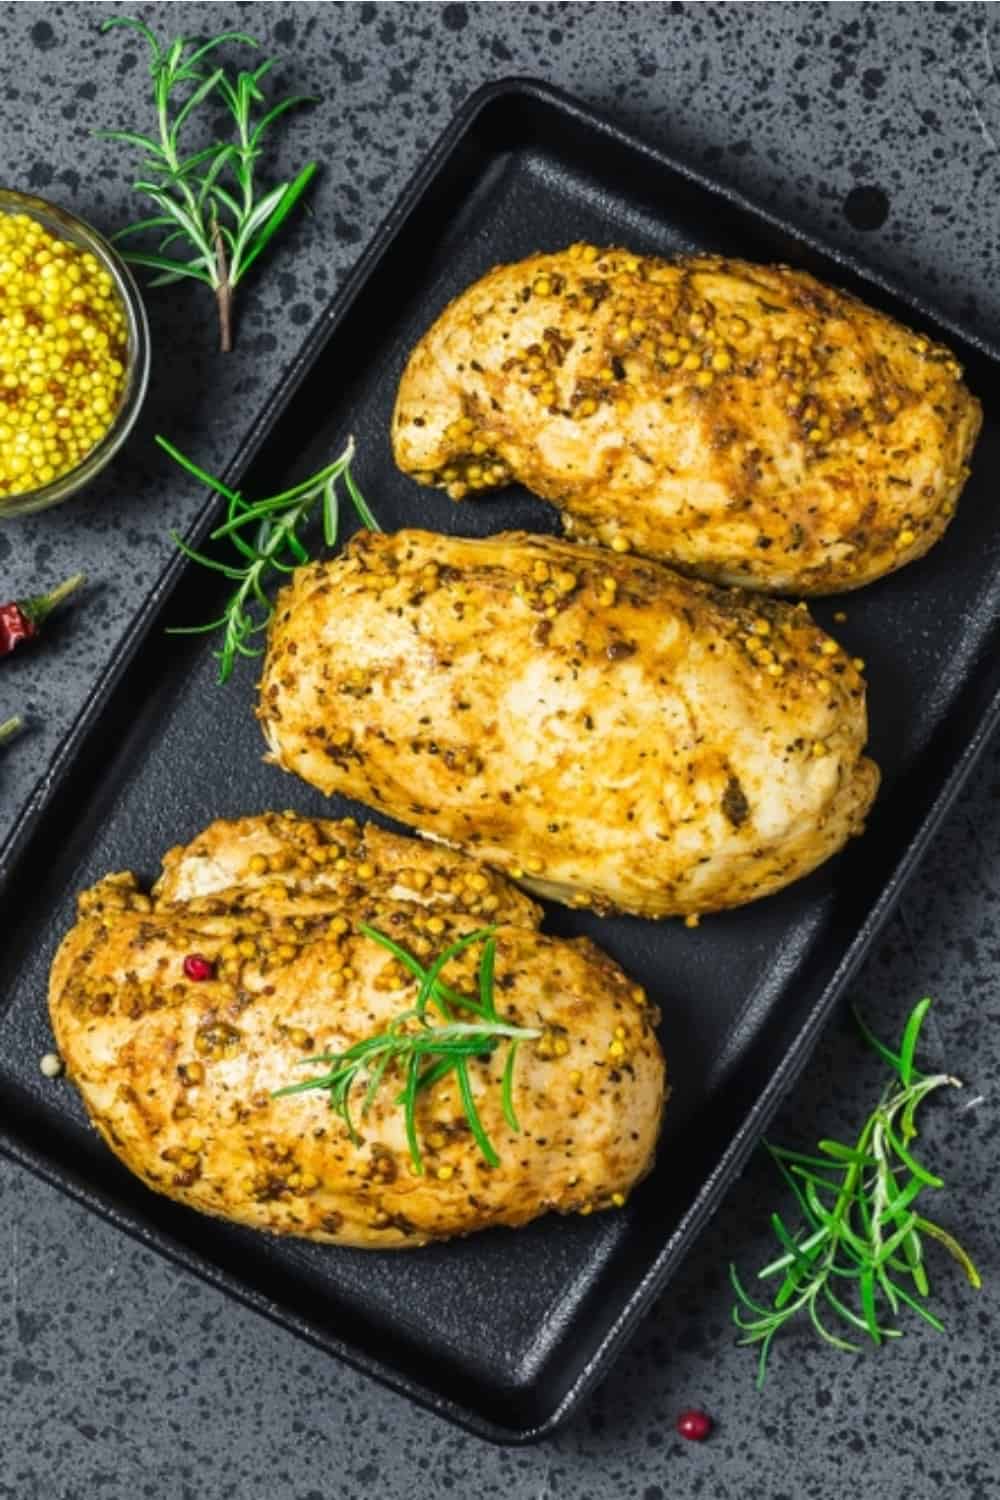 juicy chicken breast with herbs